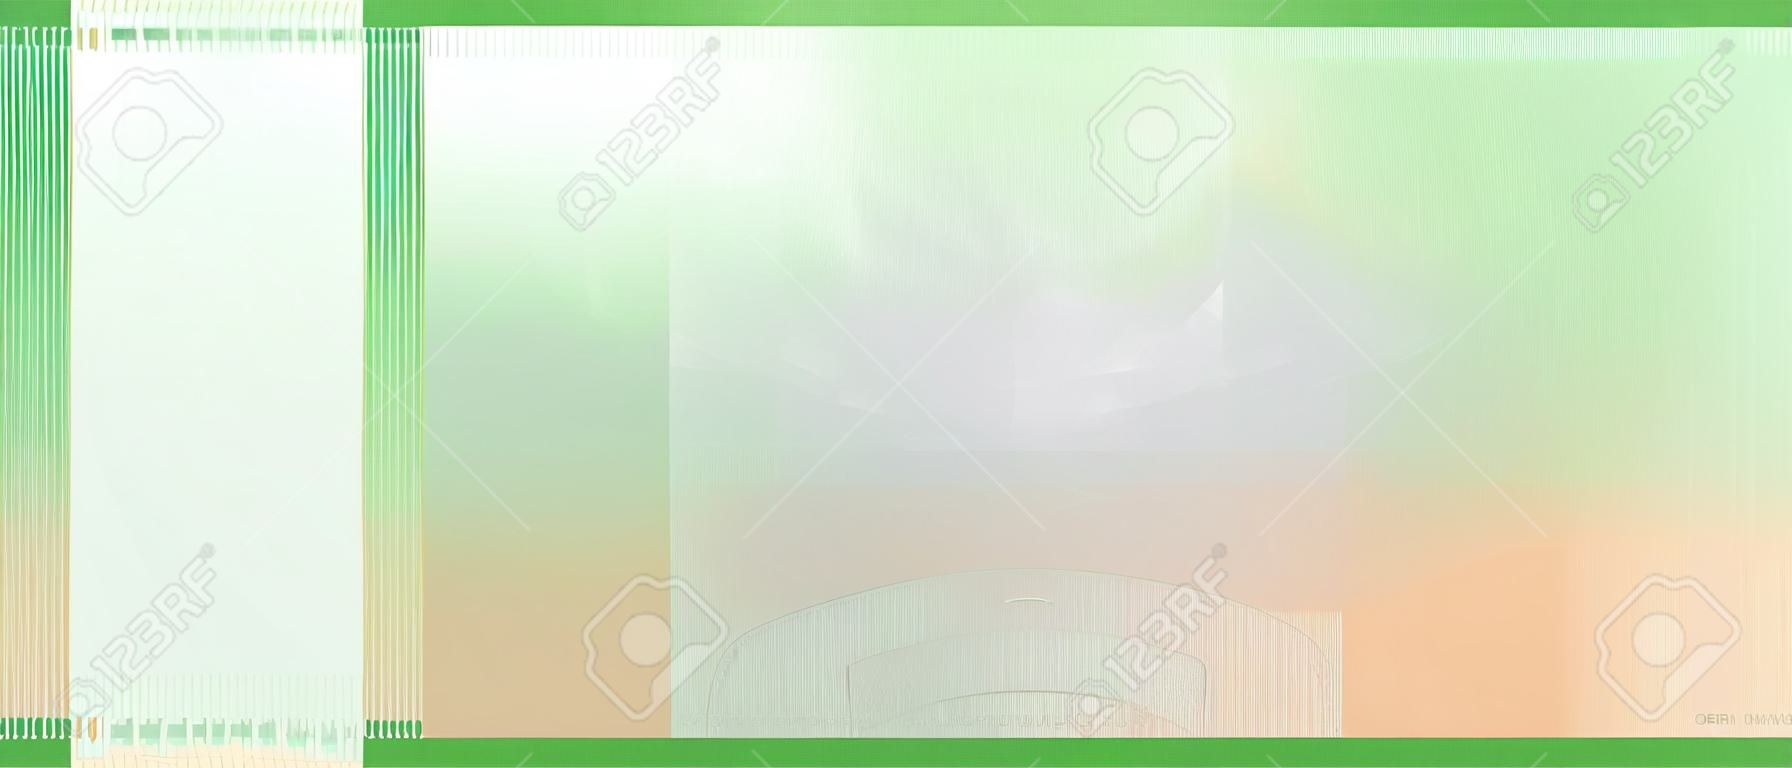 Voucher template banknote 200 with guilloche pattern watermarks and border. Green background banknote, gift voucher, coupon, diploma, money design, currency, note, check, cheque reward certificate